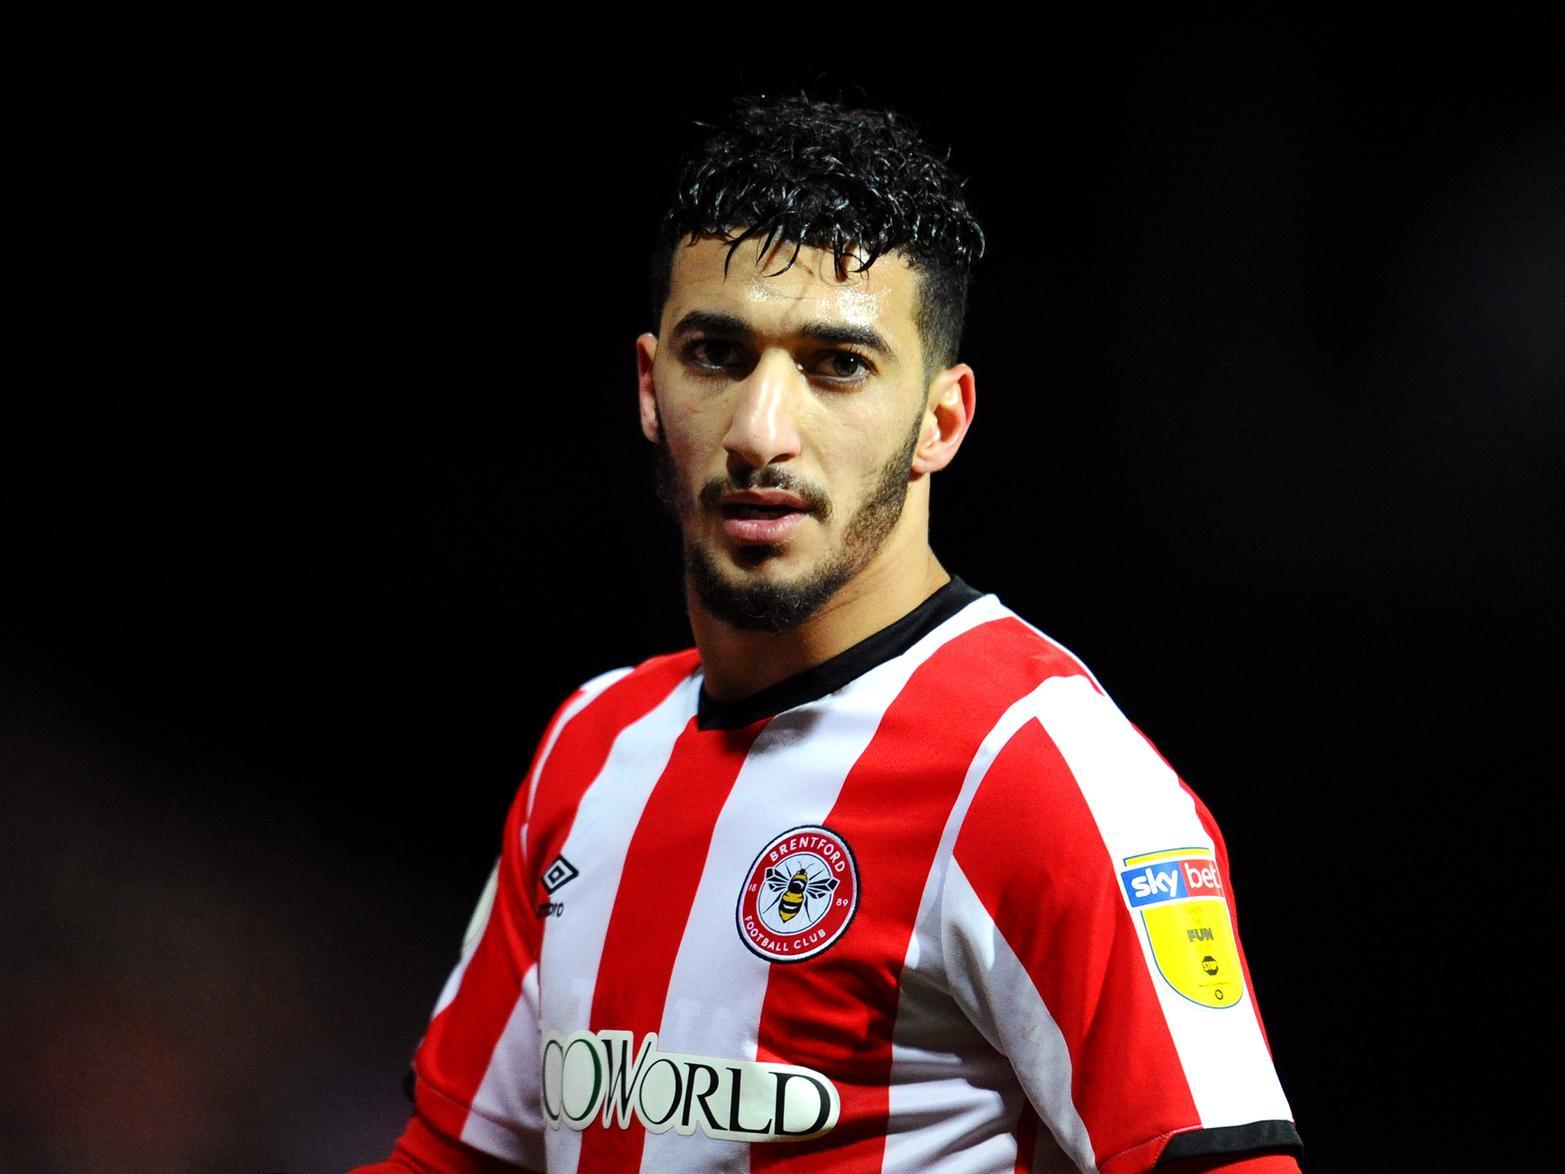 Arsenal are understood to be upping their interested in Brentford's forward sensation Said Benrahma. He's scored 11 goals and contributed five assists for the Bees so far this season. (Sport Witness)